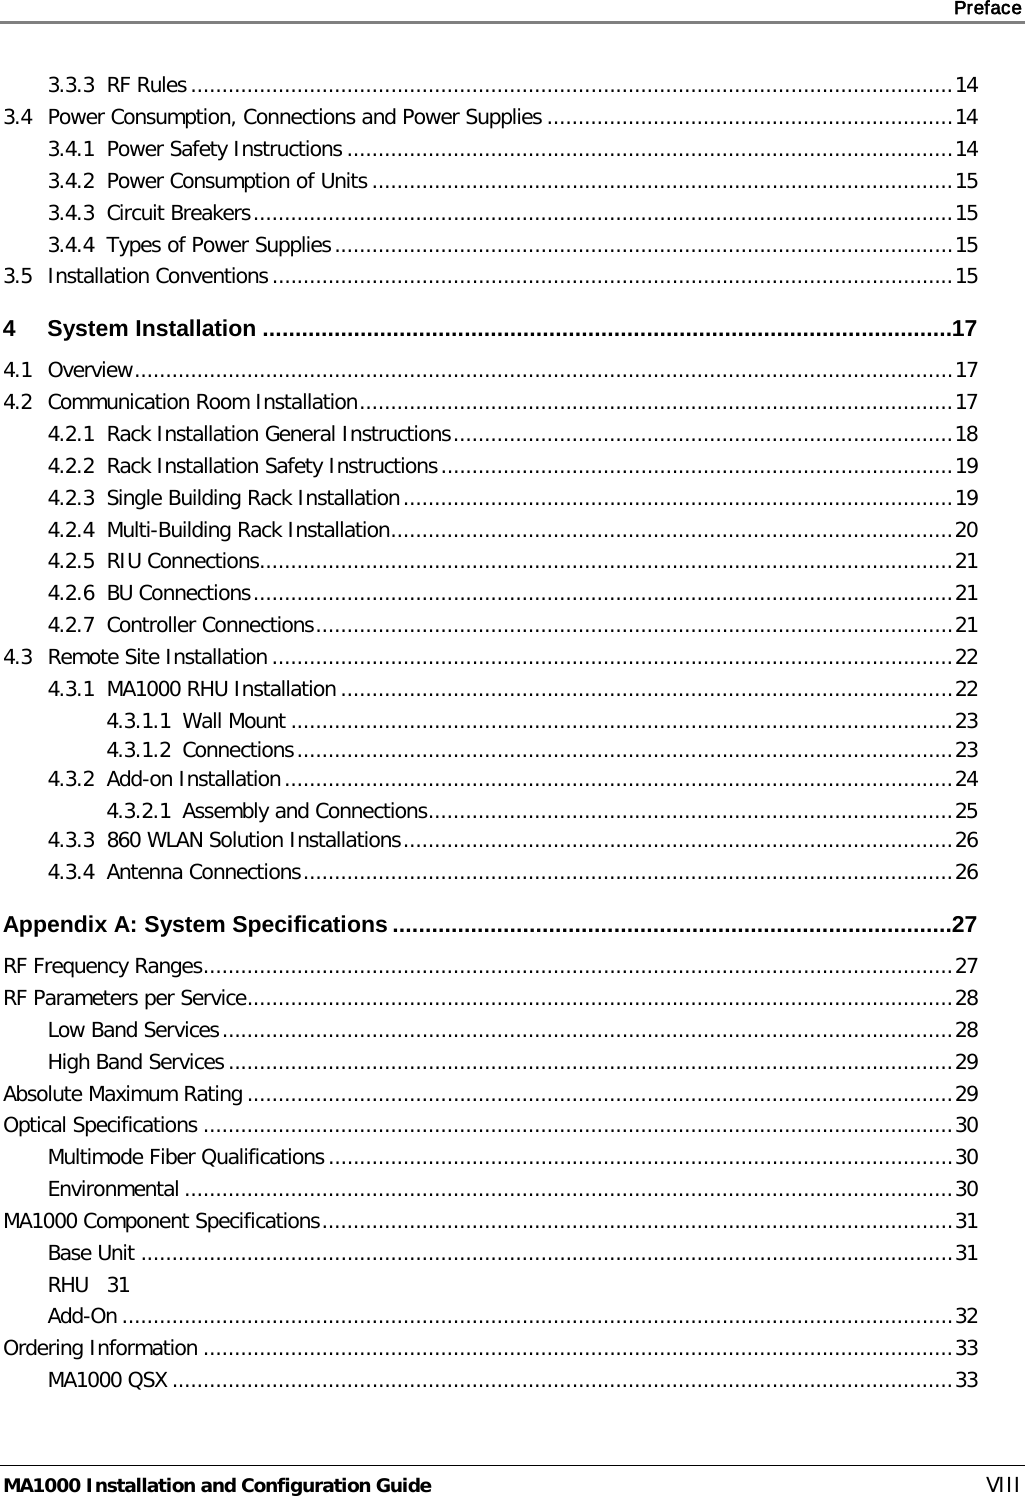     Preface       MA1000 Installation and Configuration Guide    VIII 3.3.3 RF Rules .......................................................................................................................... 14 3.4 Power Consumption, Connections and Power Supplies ................................................................. 14 3.4.1 Power Safety Instructions ................................................................................................. 14 3.4.2 Power Consumption of Units ............................................................................................. 15 3.4.3 Circuit Breakers ................................................................................................................ 15 3.4.4 Types of Power Supplies ................................................................................................... 15 3.5 Installation Conventions ............................................................................................................. 15 4 System Installation .......................................................................................................... 17 4.1 Overview ................................................................................................................................... 17 4.2 Communication Room Installation ............................................................................................... 17 4.2.1 Rack Installation General Instructions ................................................................................ 18 4.2.2 Rack Installation Safety Instructions .................................................................................. 19 4.2.3 Single Building Rack Installation ........................................................................................ 19 4.2.4 Multi-Building Rack Installation .......................................................................................... 20 4.2.5 RIU Connections ............................................................................................................... 21 4.2.6 BU Connections ................................................................................................................ 21 4.2.7 Controller Connections ...................................................................................................... 21 4.3 Remote Site Installation ............................................................................................................. 22 4.3.1 MA1000 RHU Installation .................................................................................................. 22 4.3.1.1 Wall Mount .......................................................................................................... 23 4.3.1.2 Connections ......................................................................................................... 23 4.3.2 Add-on Installation ........................................................................................................... 24 4.3.2.1 Assembly and Connections .................................................................................... 25 4.3.3 860 WLAN Solution Installations ........................................................................................ 26 4.3.4 Antenna Connections ........................................................................................................ 26 Appendix A: System Specifications ...................................................................................... 27 RF Frequency Ranges ........................................................................................................................ 27 RF Parameters per Service ................................................................................................................. 28 Low Band Services ..................................................................................................................... 28 High Band Services .................................................................................................................... 29 Absolute Maximum Rating ................................................................................................................. 29 Optical Specifications ........................................................................................................................ 30 Multimode Fiber Qualifications .................................................................................................... 30 Environmental ........................................................................................................................... 30 MA1000 Component Specifications ..................................................................................................... 31 Base Unit .................................................................................................................................. 31 RHU 31 Add-On ..................................................................................................................................... 32 Ordering Information ........................................................................................................................ 33 MA1000 QSX ............................................................................................................................. 33 